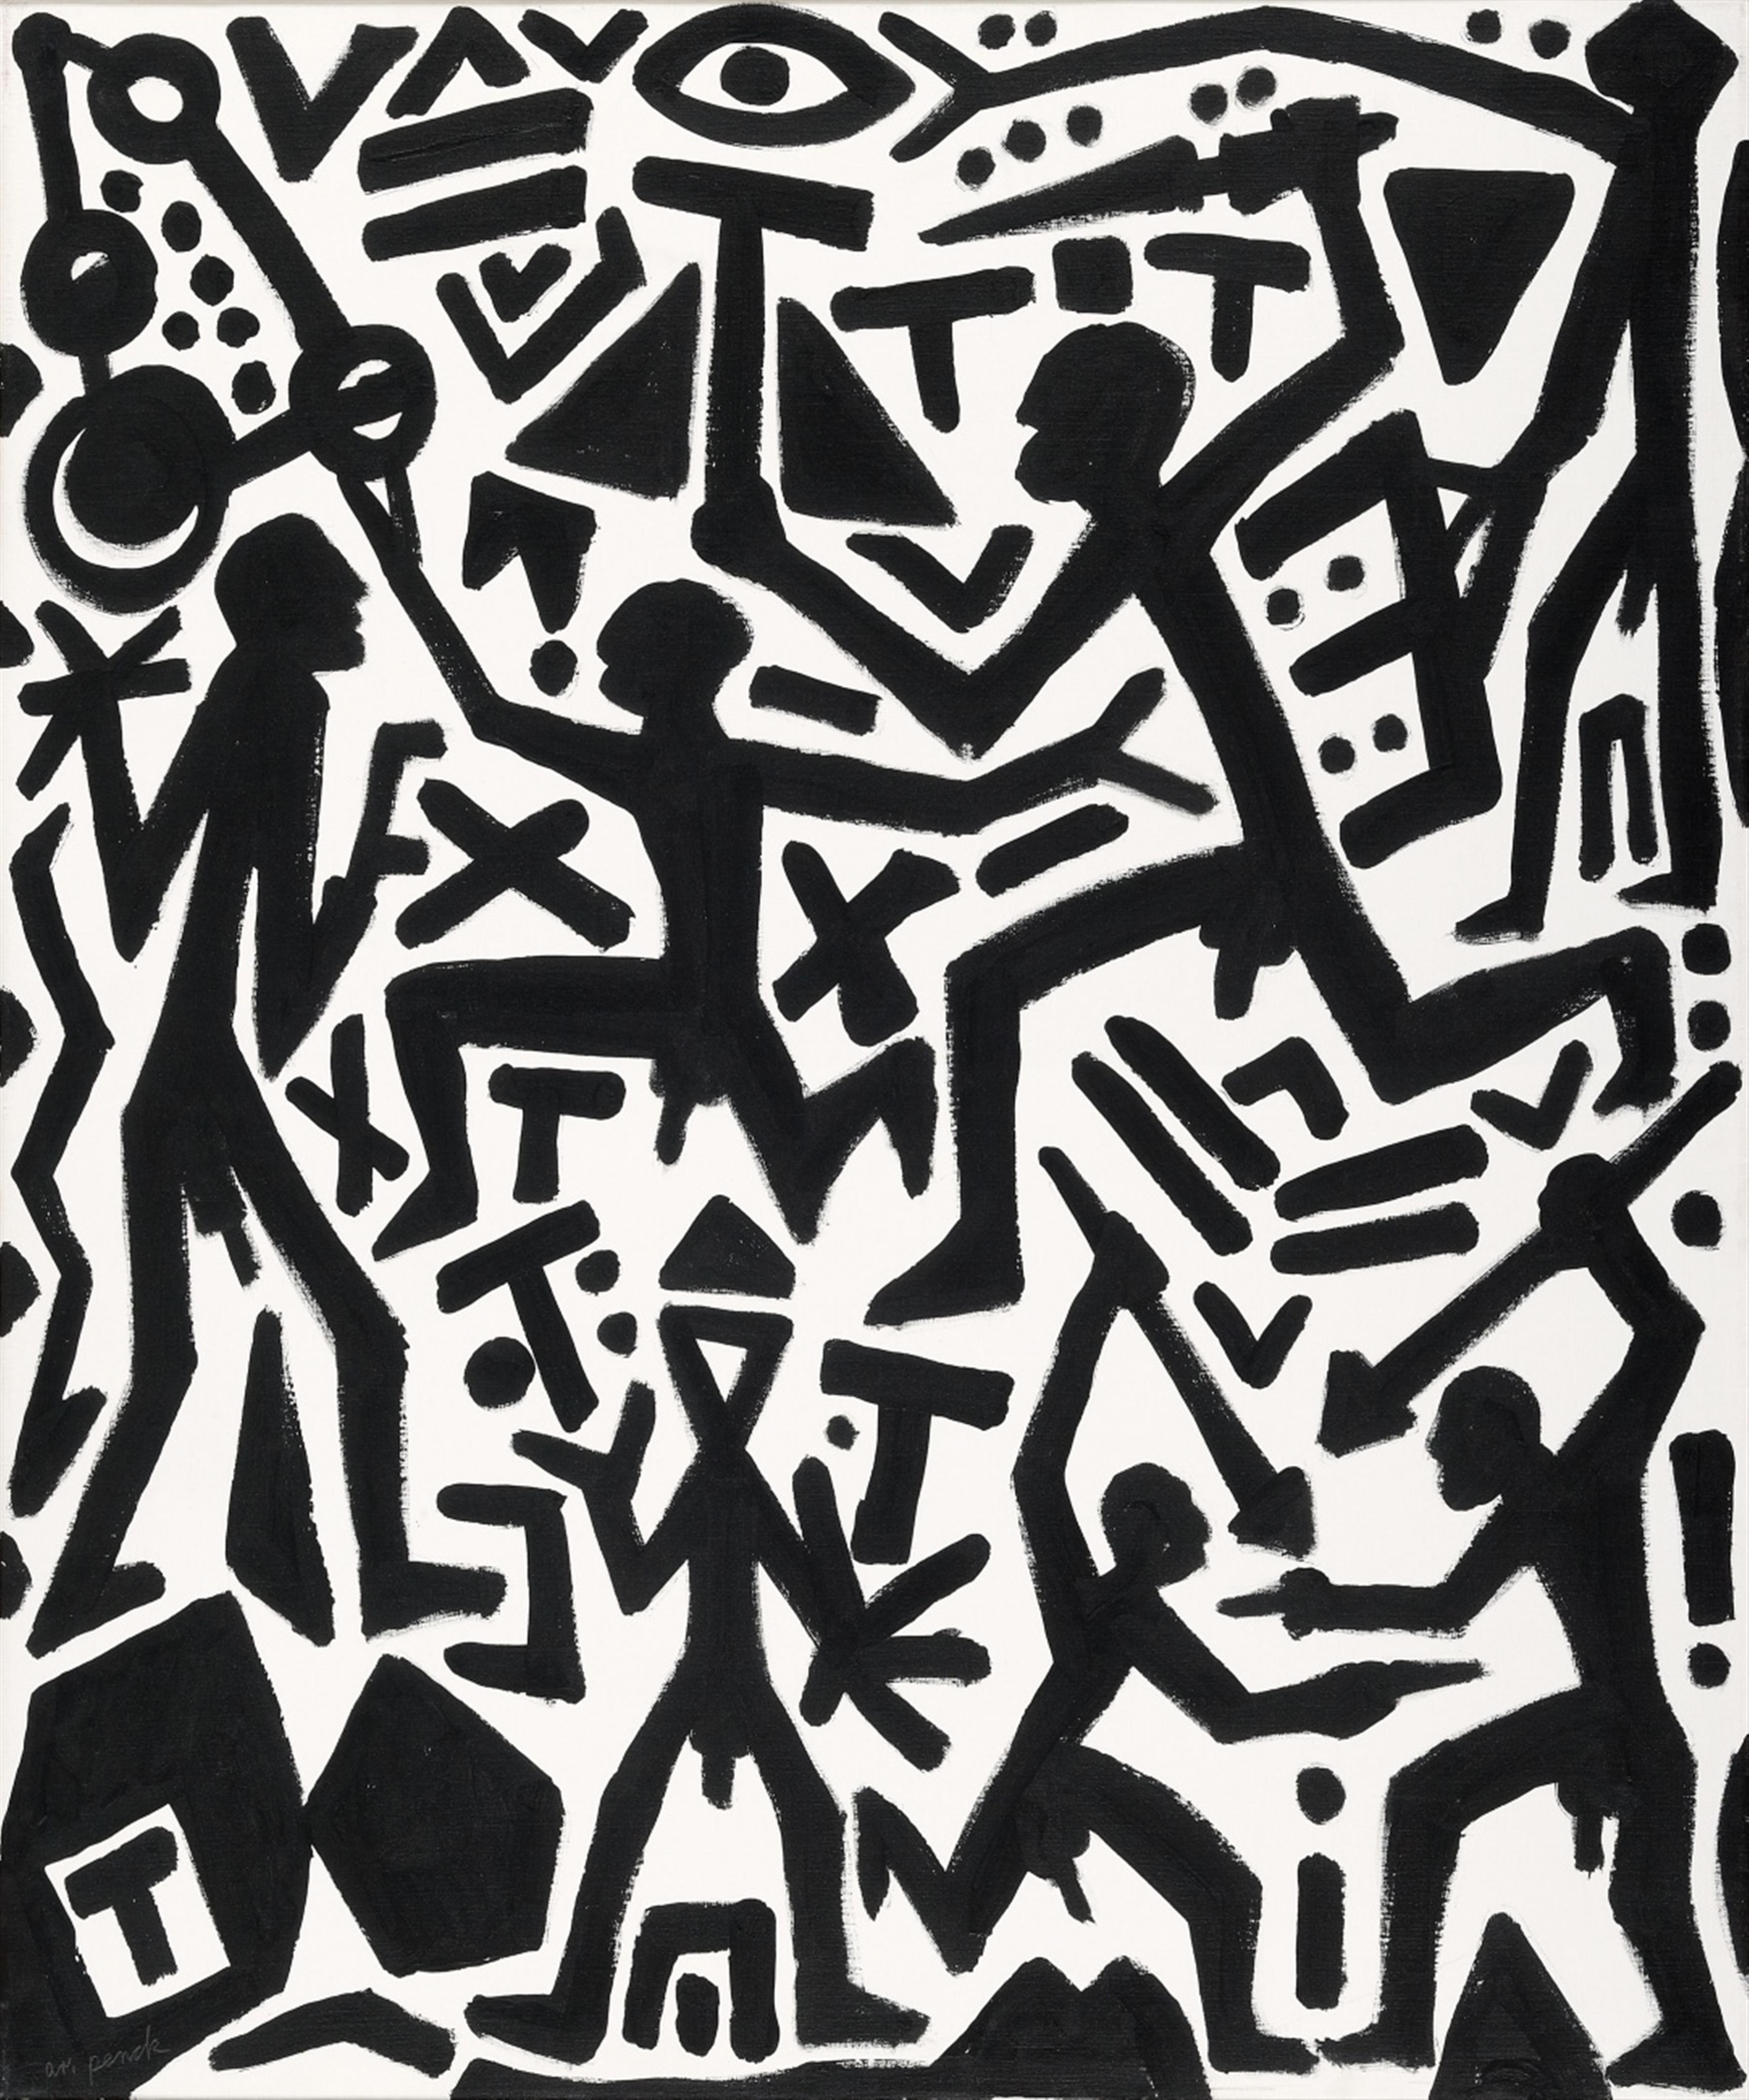 A.R. Penck - Chaotisches System - image-1